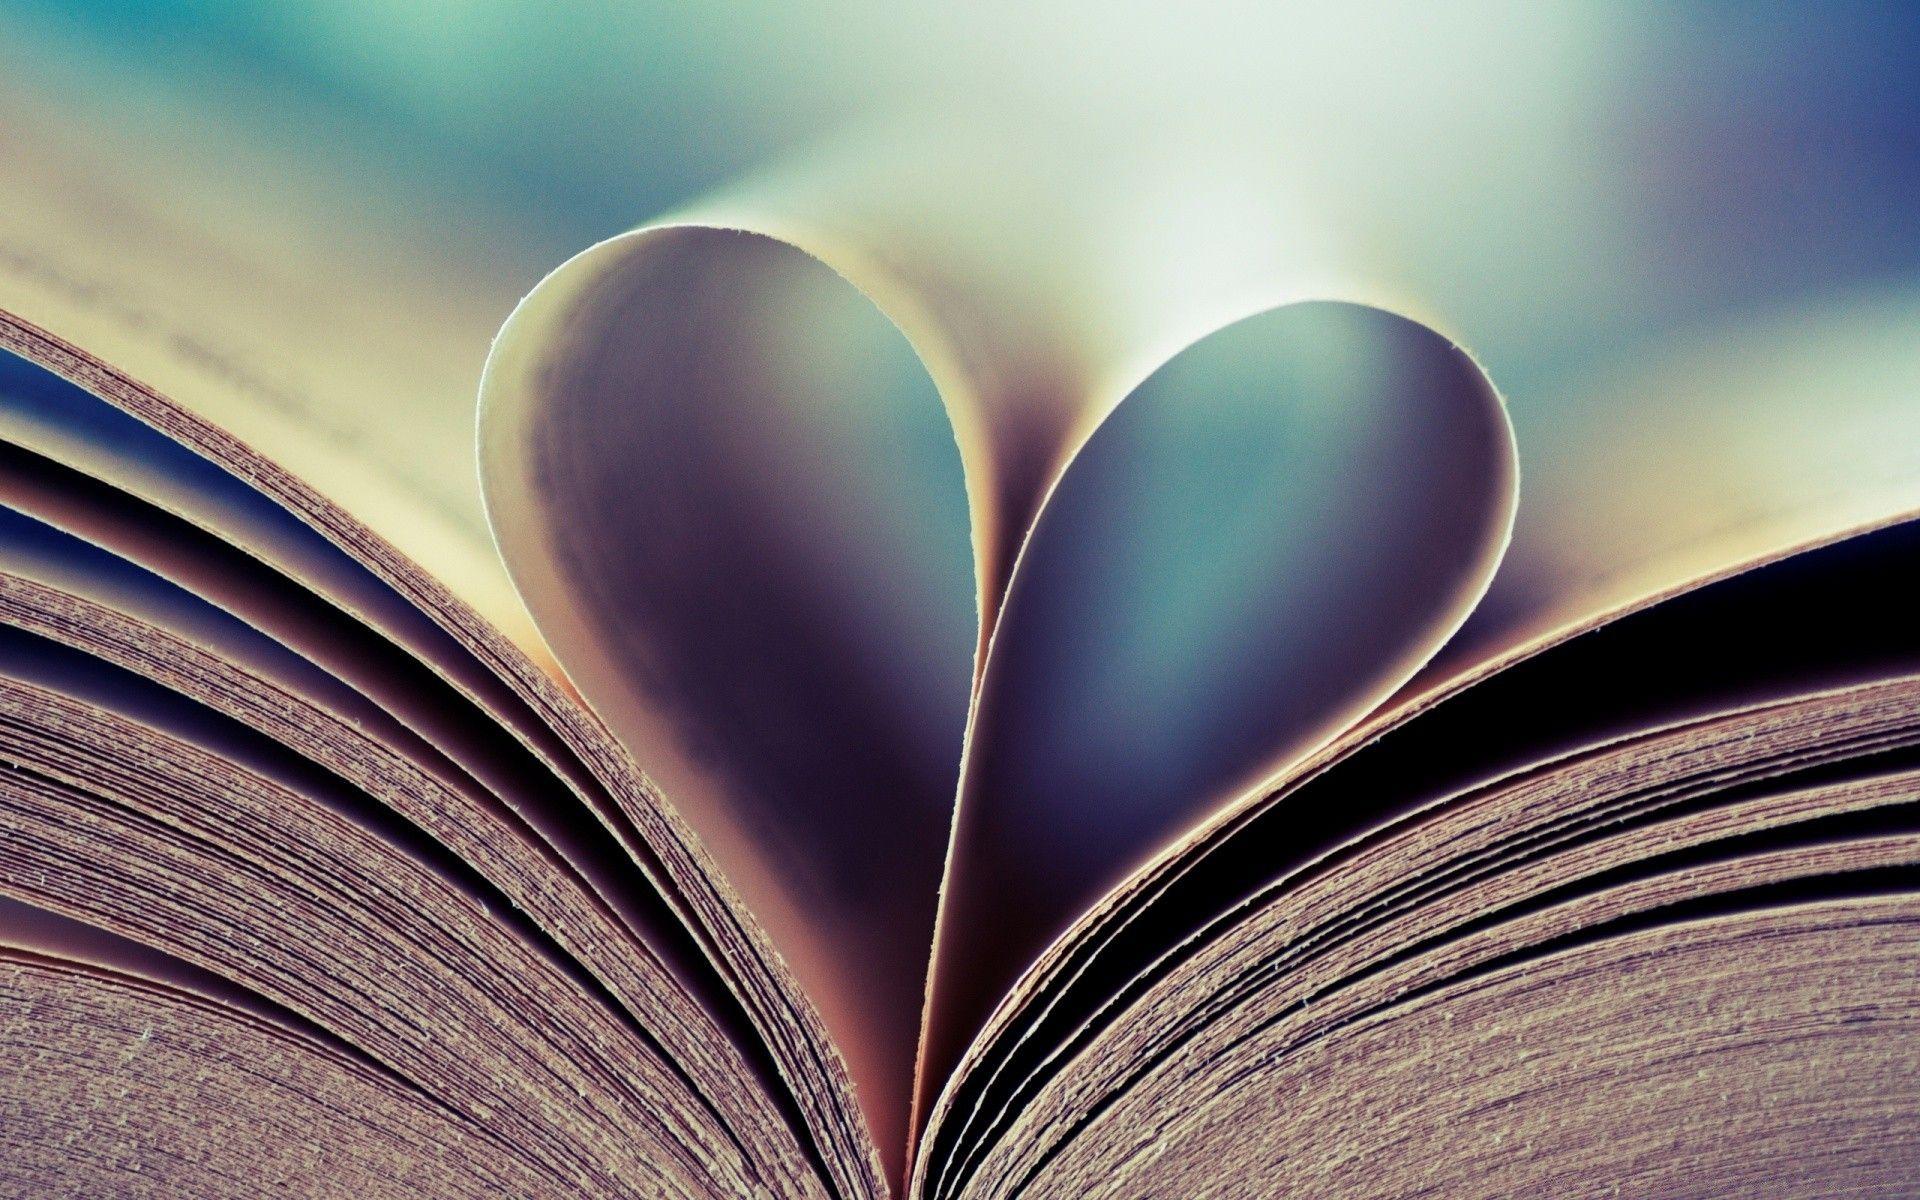 Book Heart. Android wallpaper for free